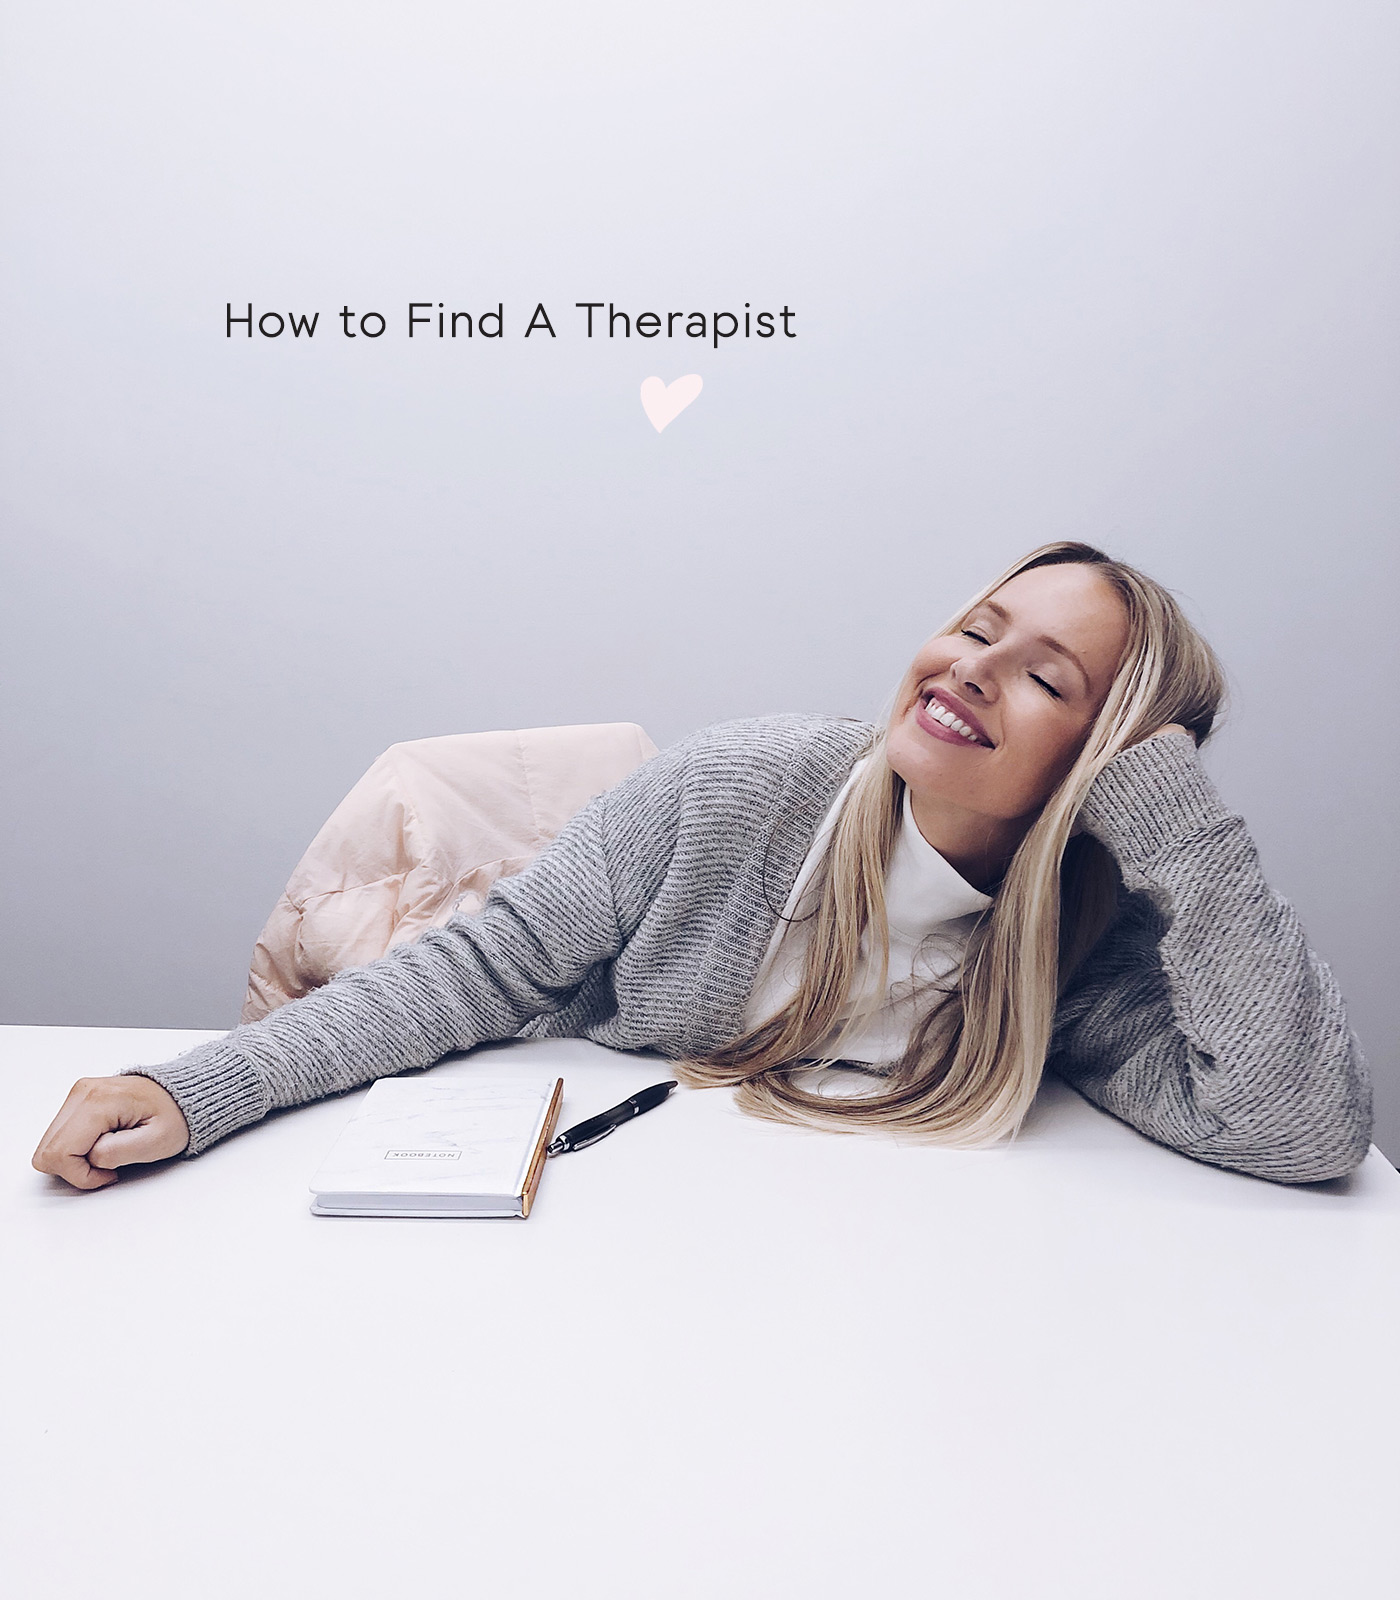 How To Find A Therapist